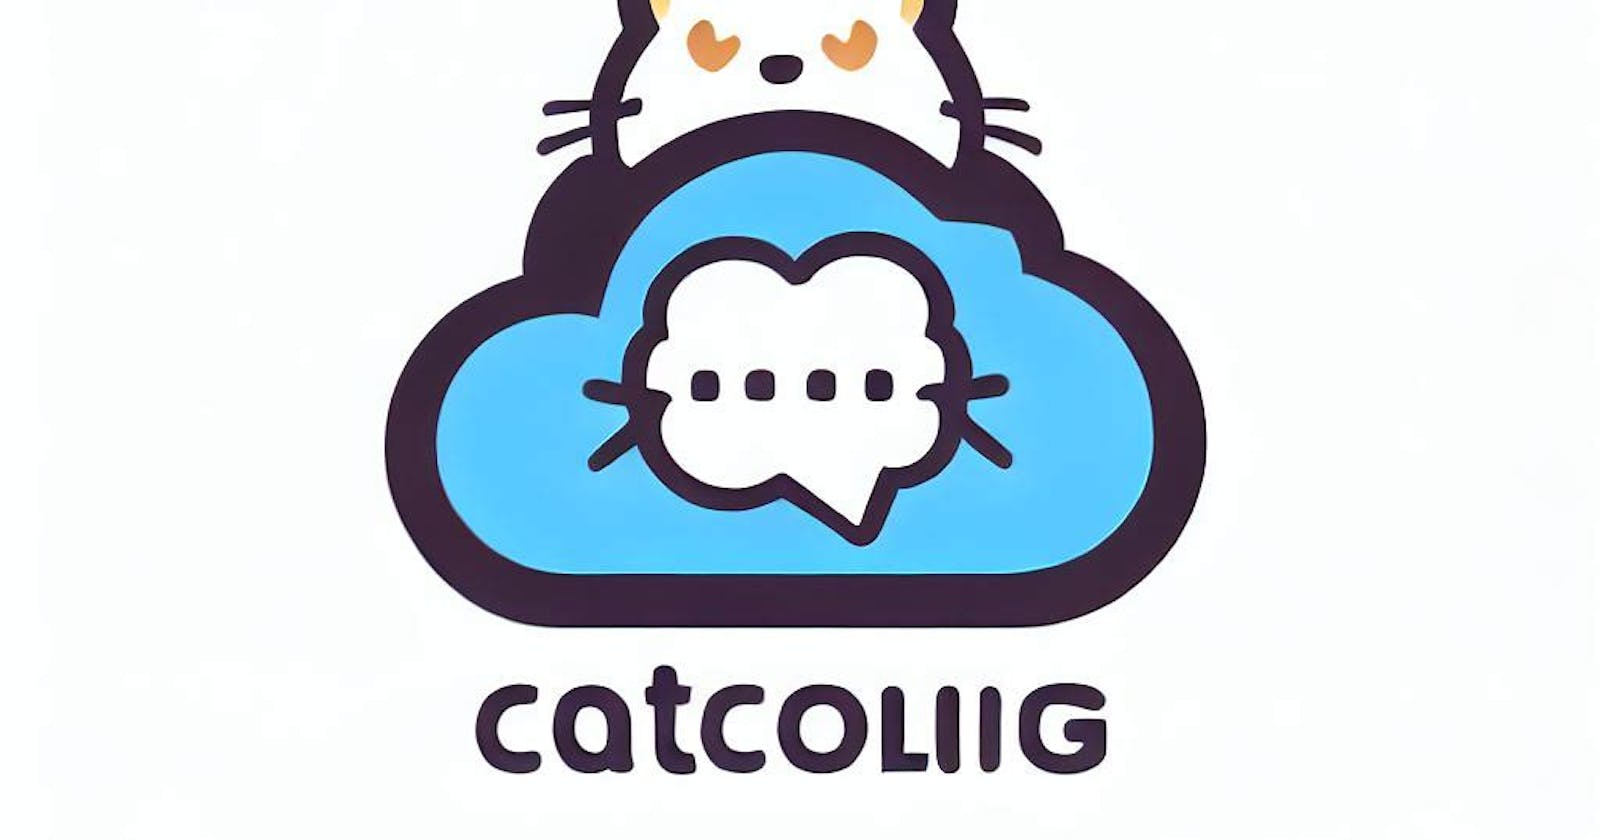 Bing: create a logo that talk about cloud computing and has a cat on it